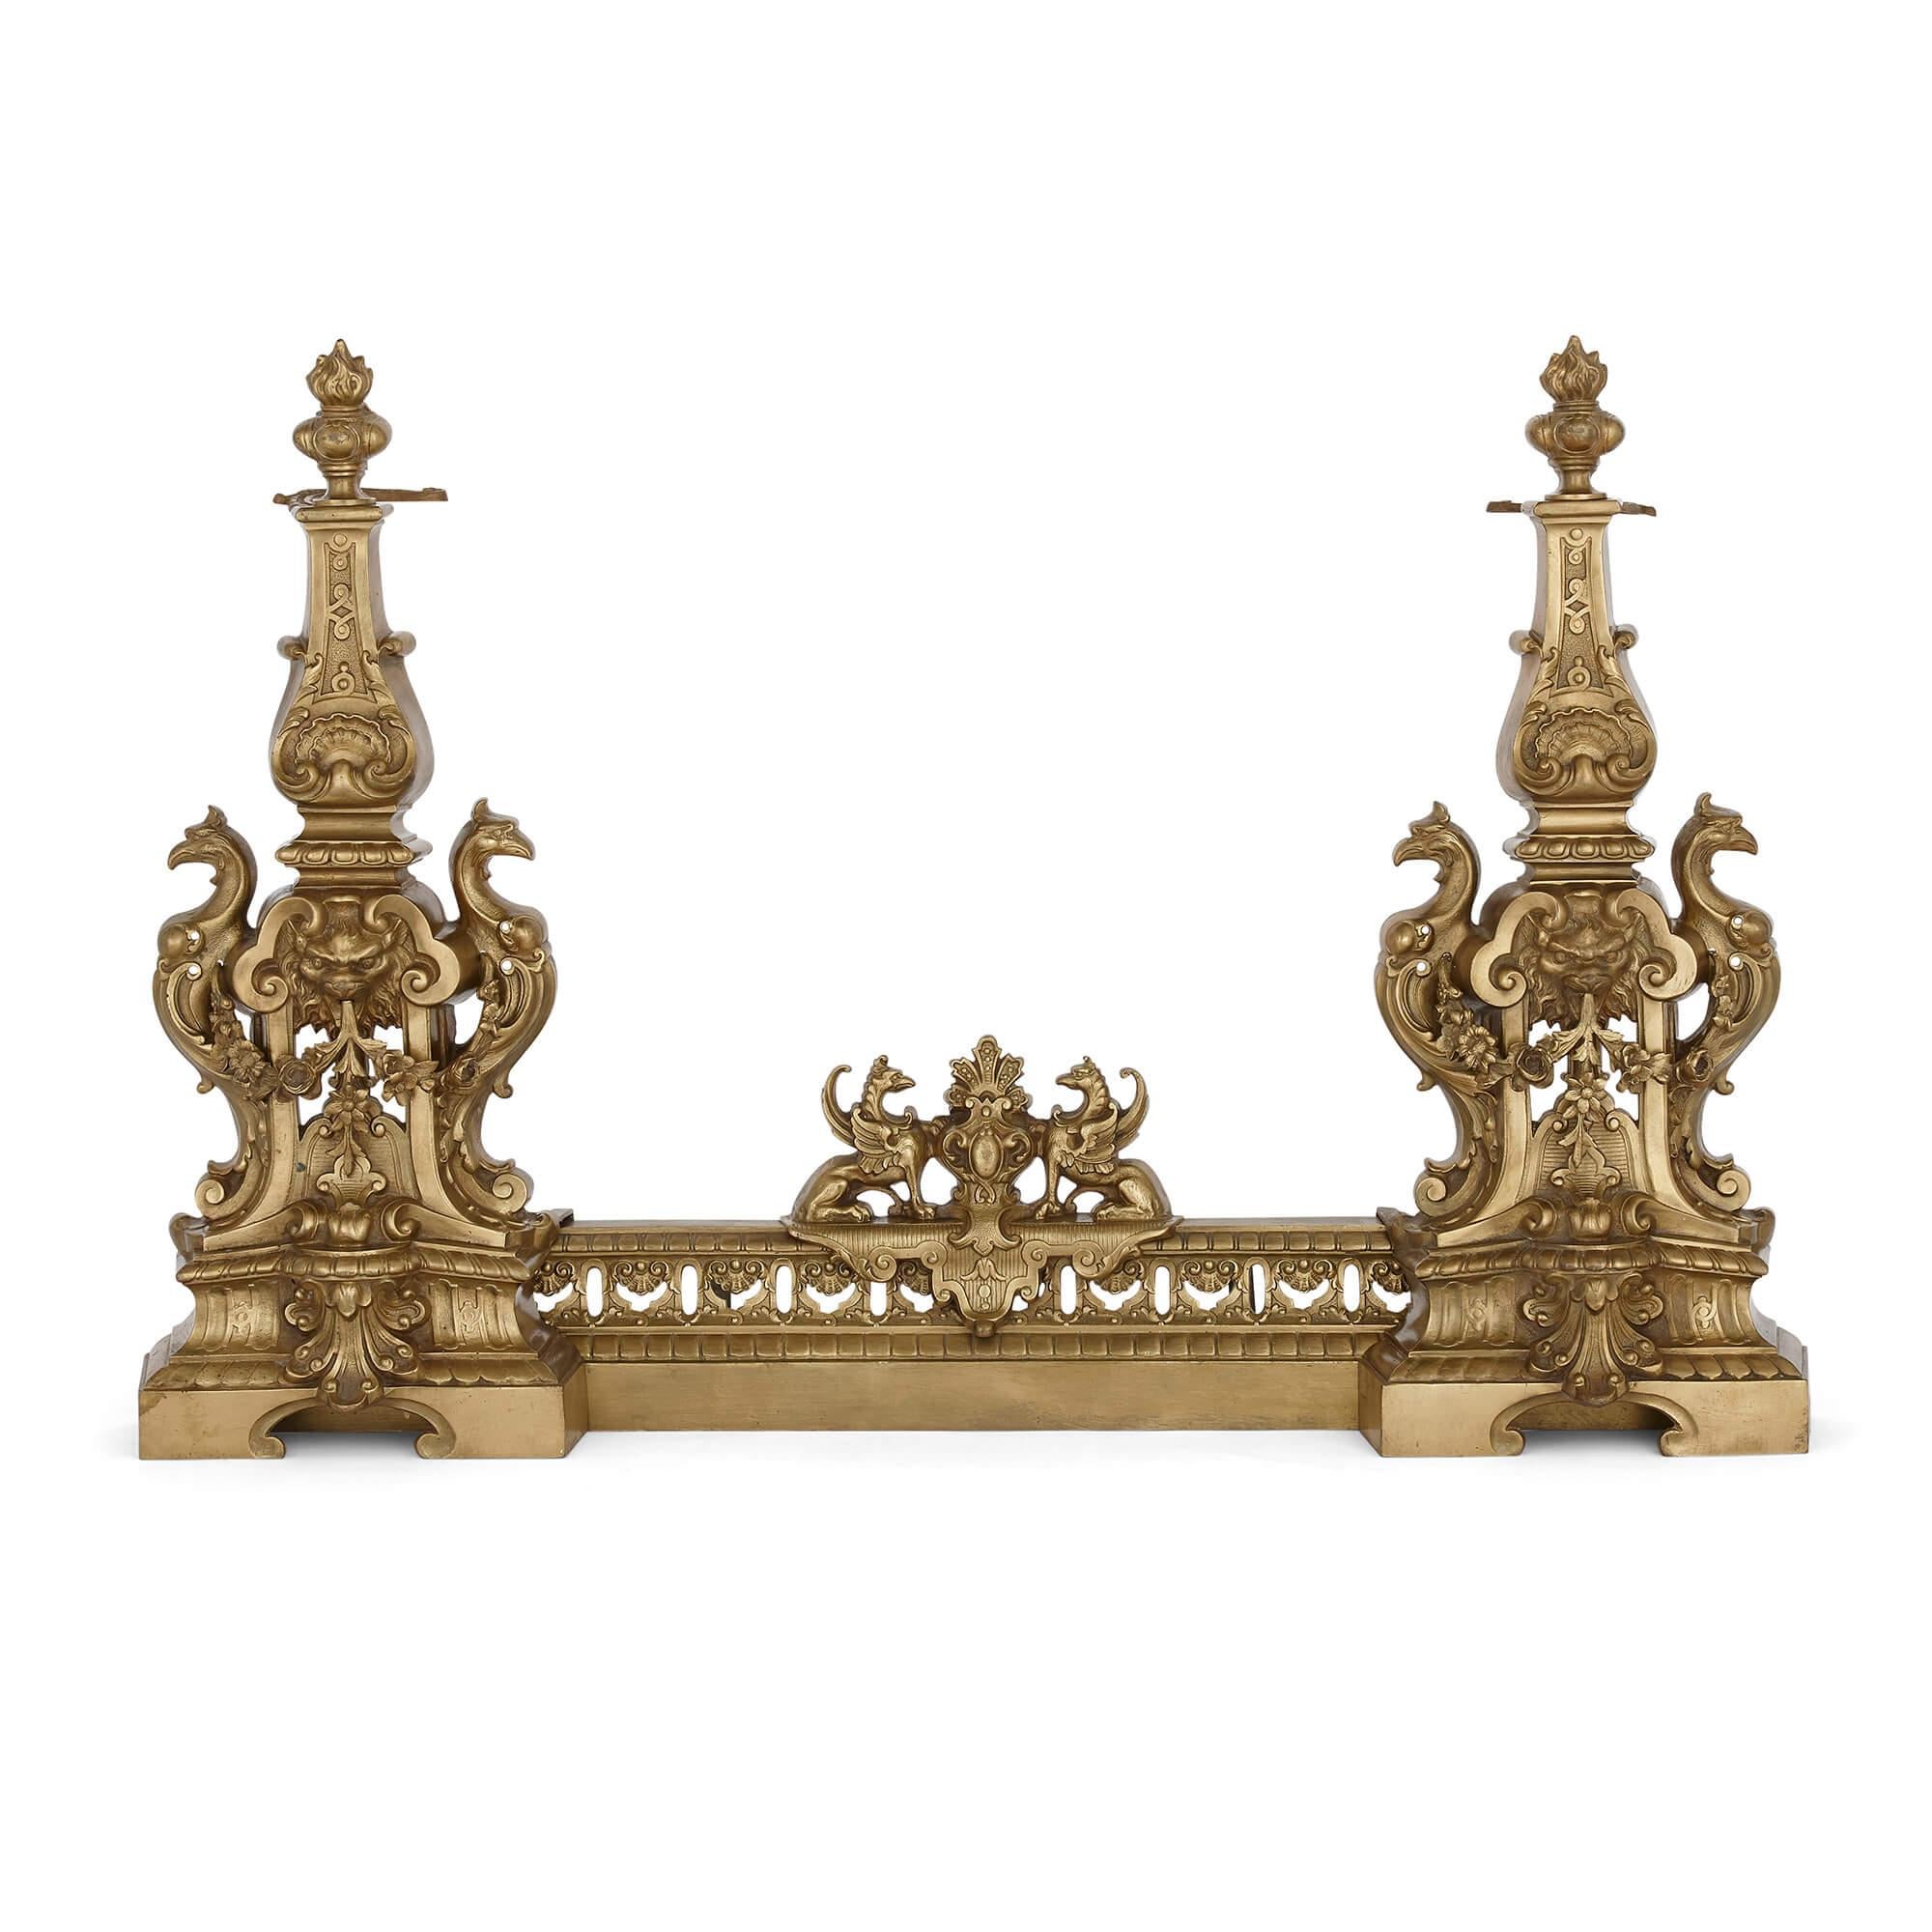 Baroque style pierced brass hearth fender
French, 19th century
Measures: Height 56cm, width when open 120cm, width when closed 86cm, depth 13cm

This beautiful hearth—or fireplace—fender is crafted from brass in the exuberant Baroque style. The